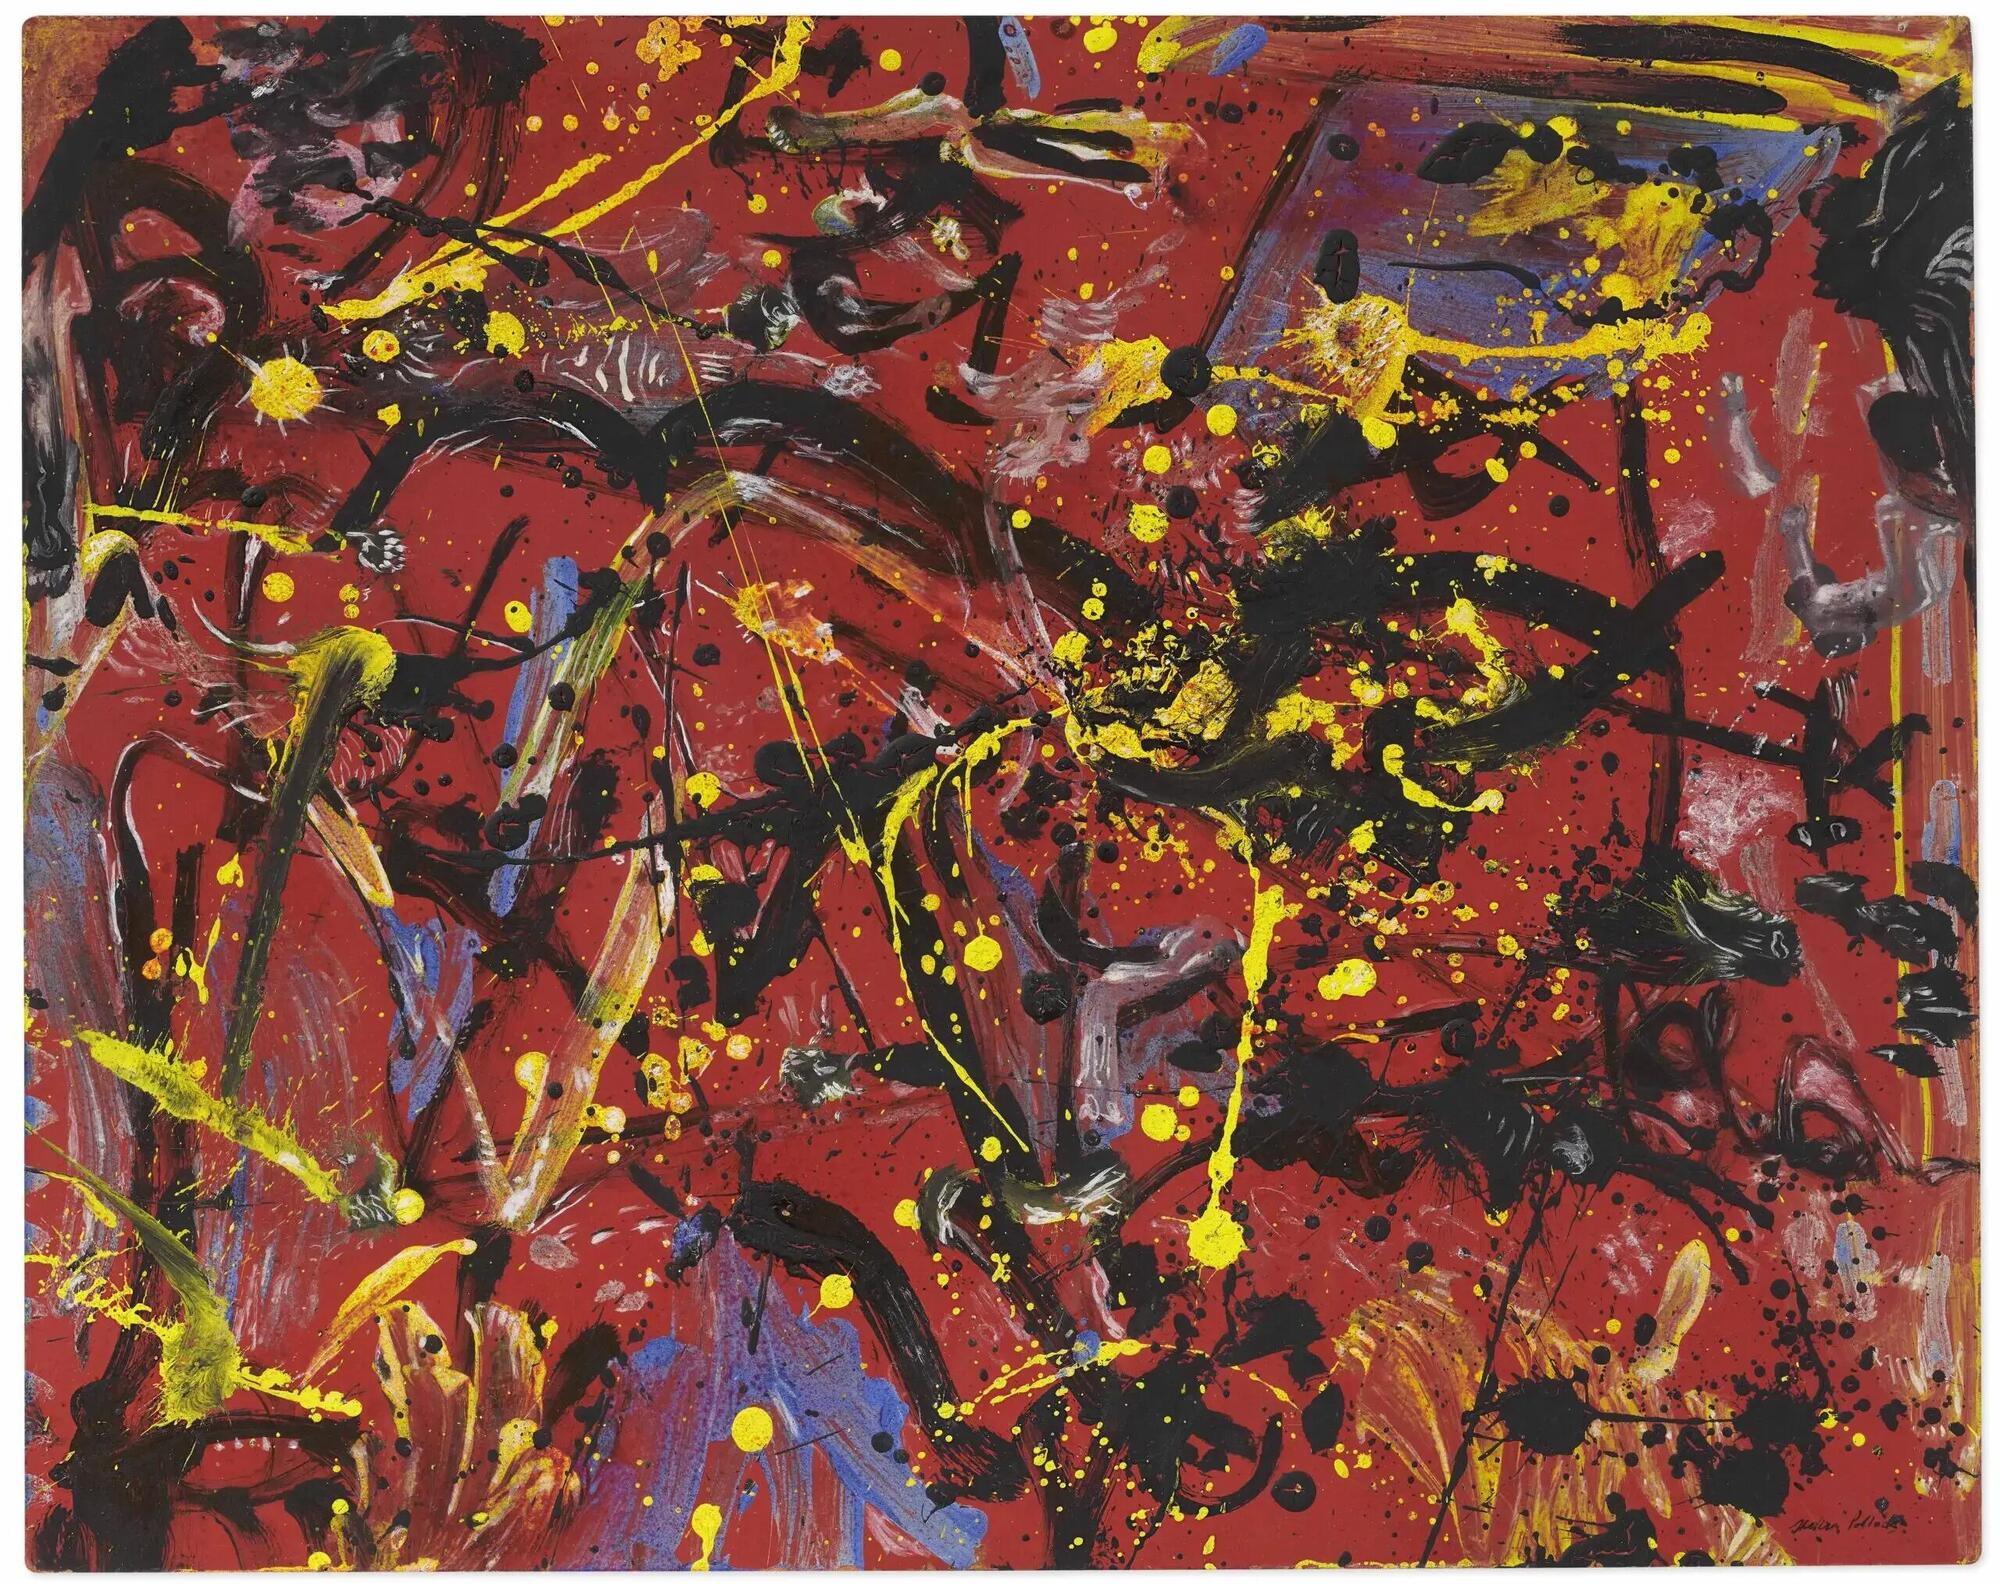 Jackson Pollock, Red Composition, 1946